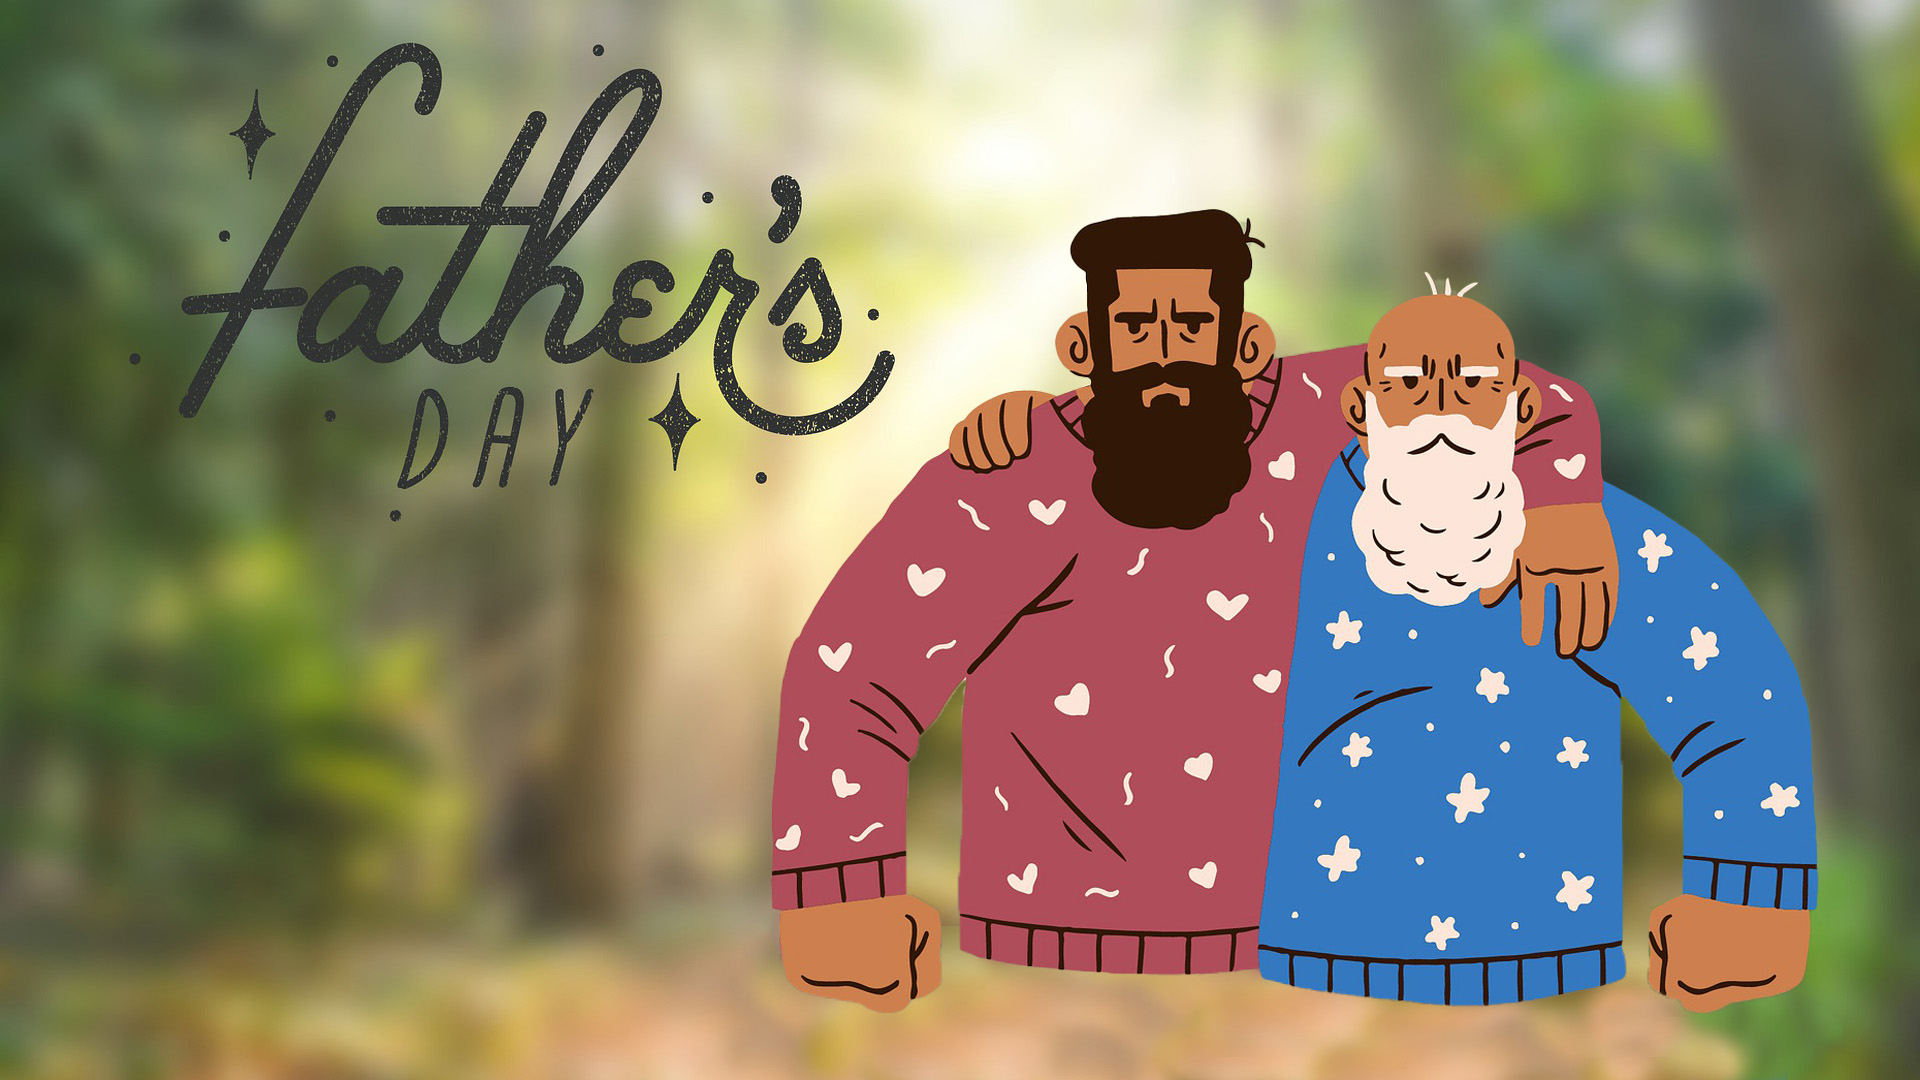 Two larger illustrated muscular men with beards, one middle aged and one older, are side hugging each other. Father's Day is written to the left of them in a grunge cursive font.